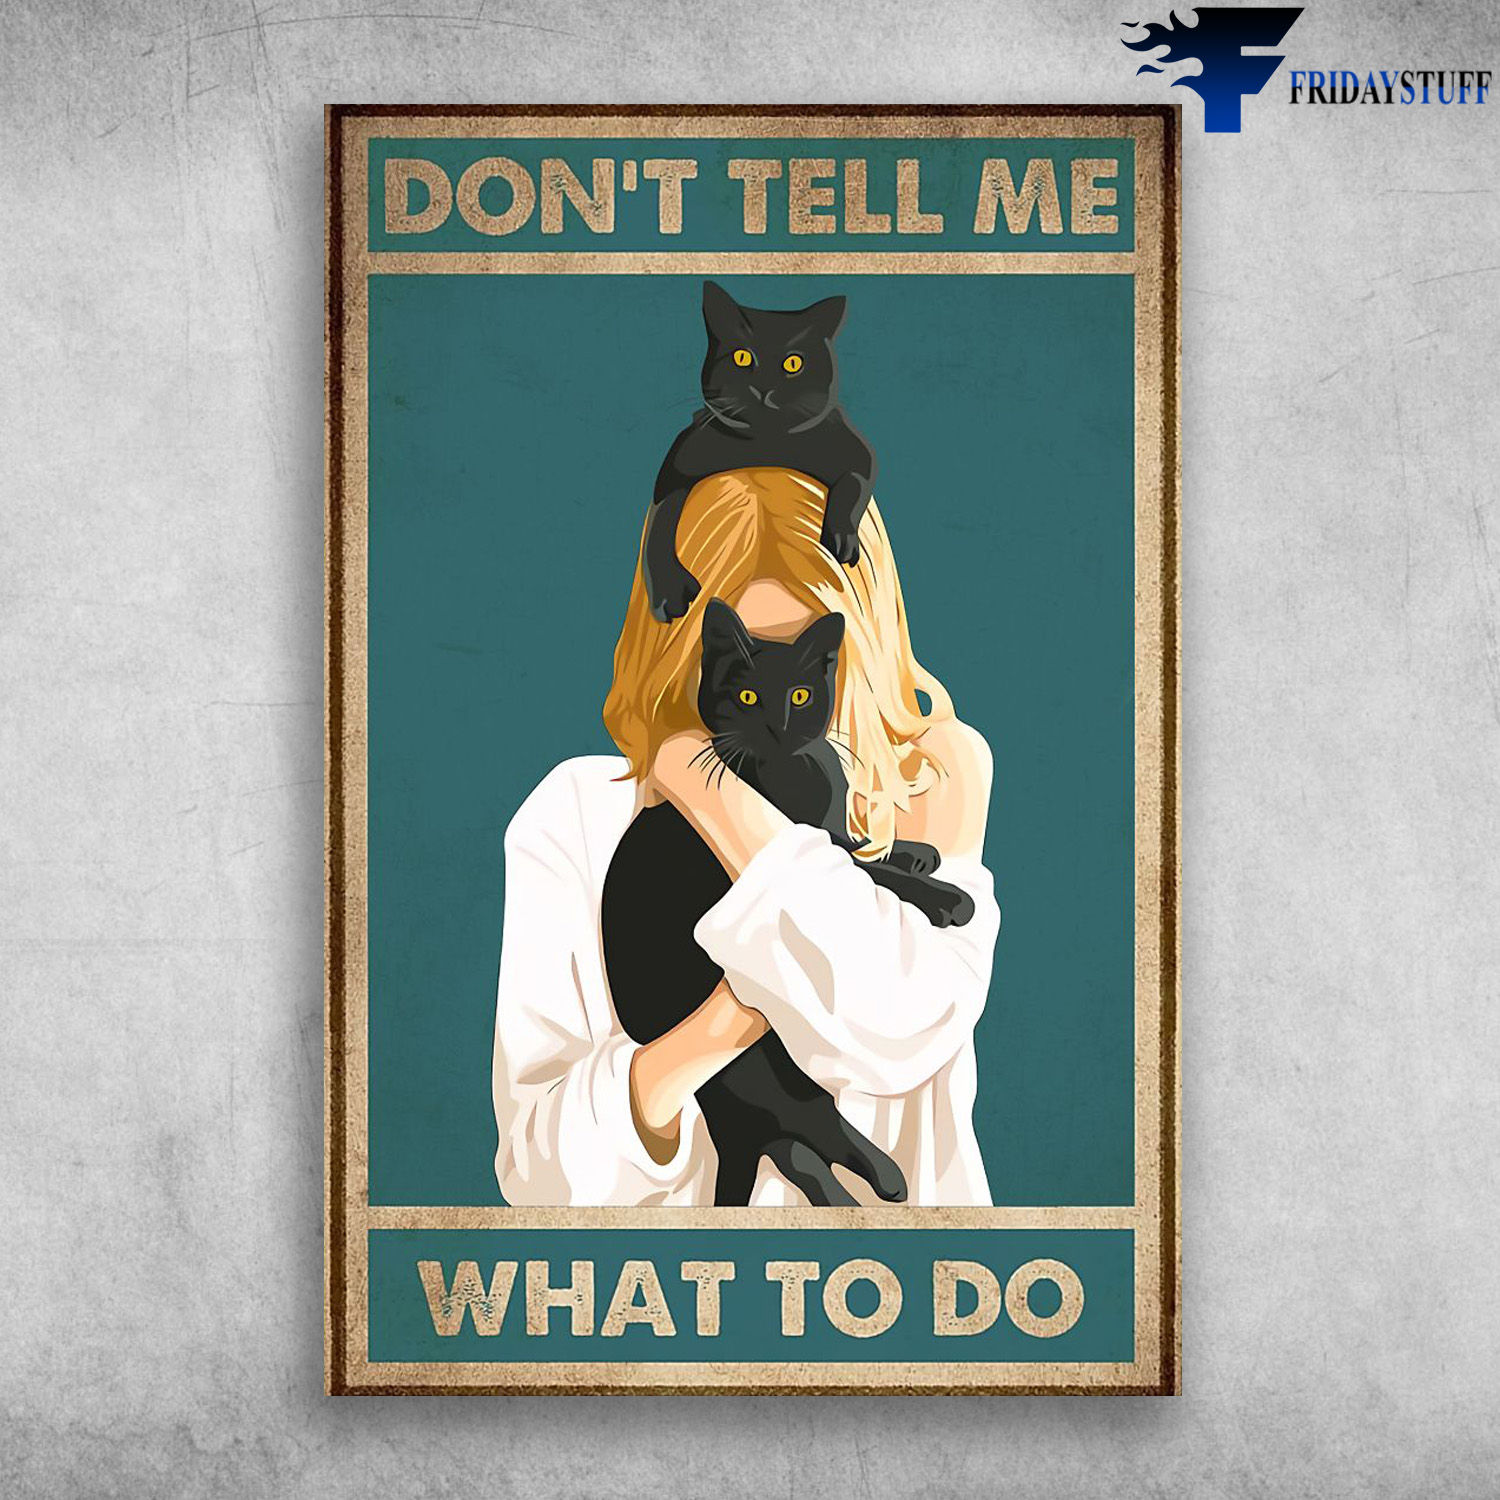 Girl With Black Cats - Don't Tell Me, What To Do